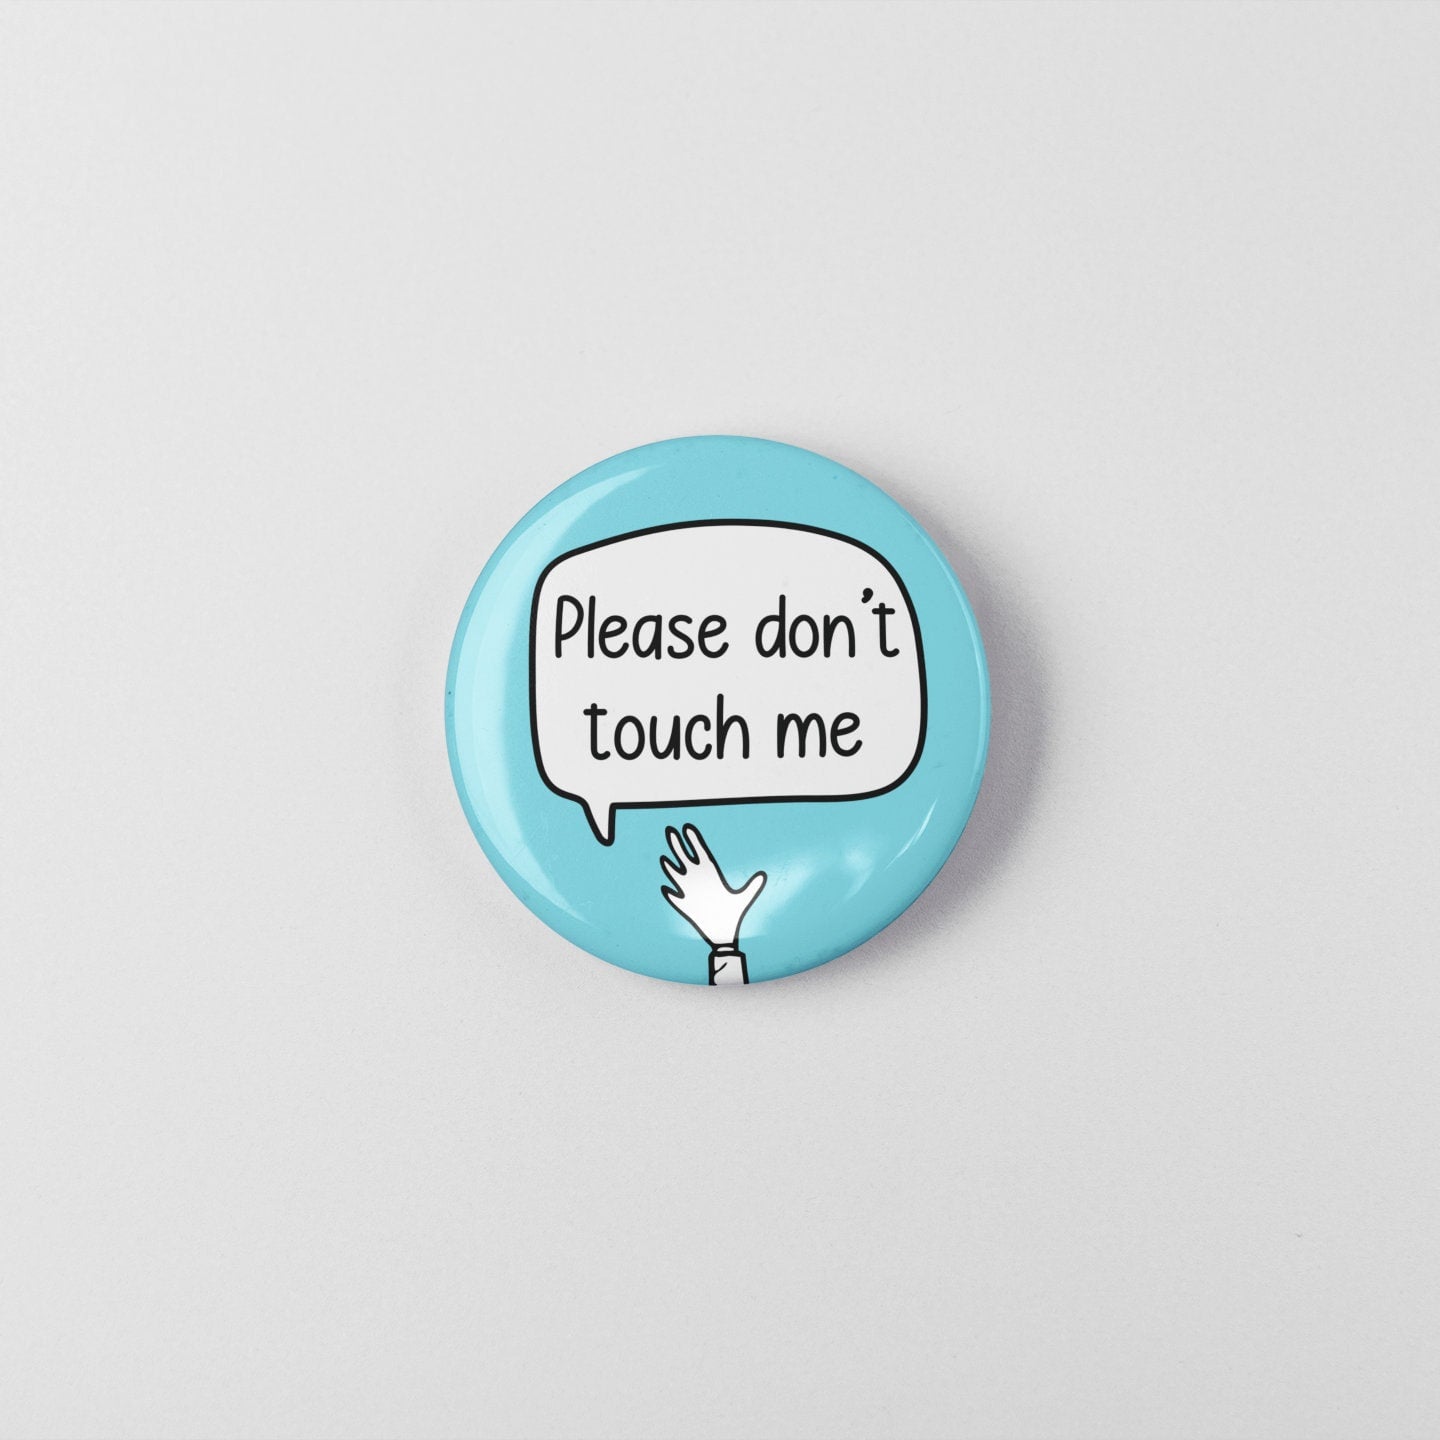 Please Don't Touch Me Badge Pin | Anxiety Badge - Personal Space - Respect Boundaries